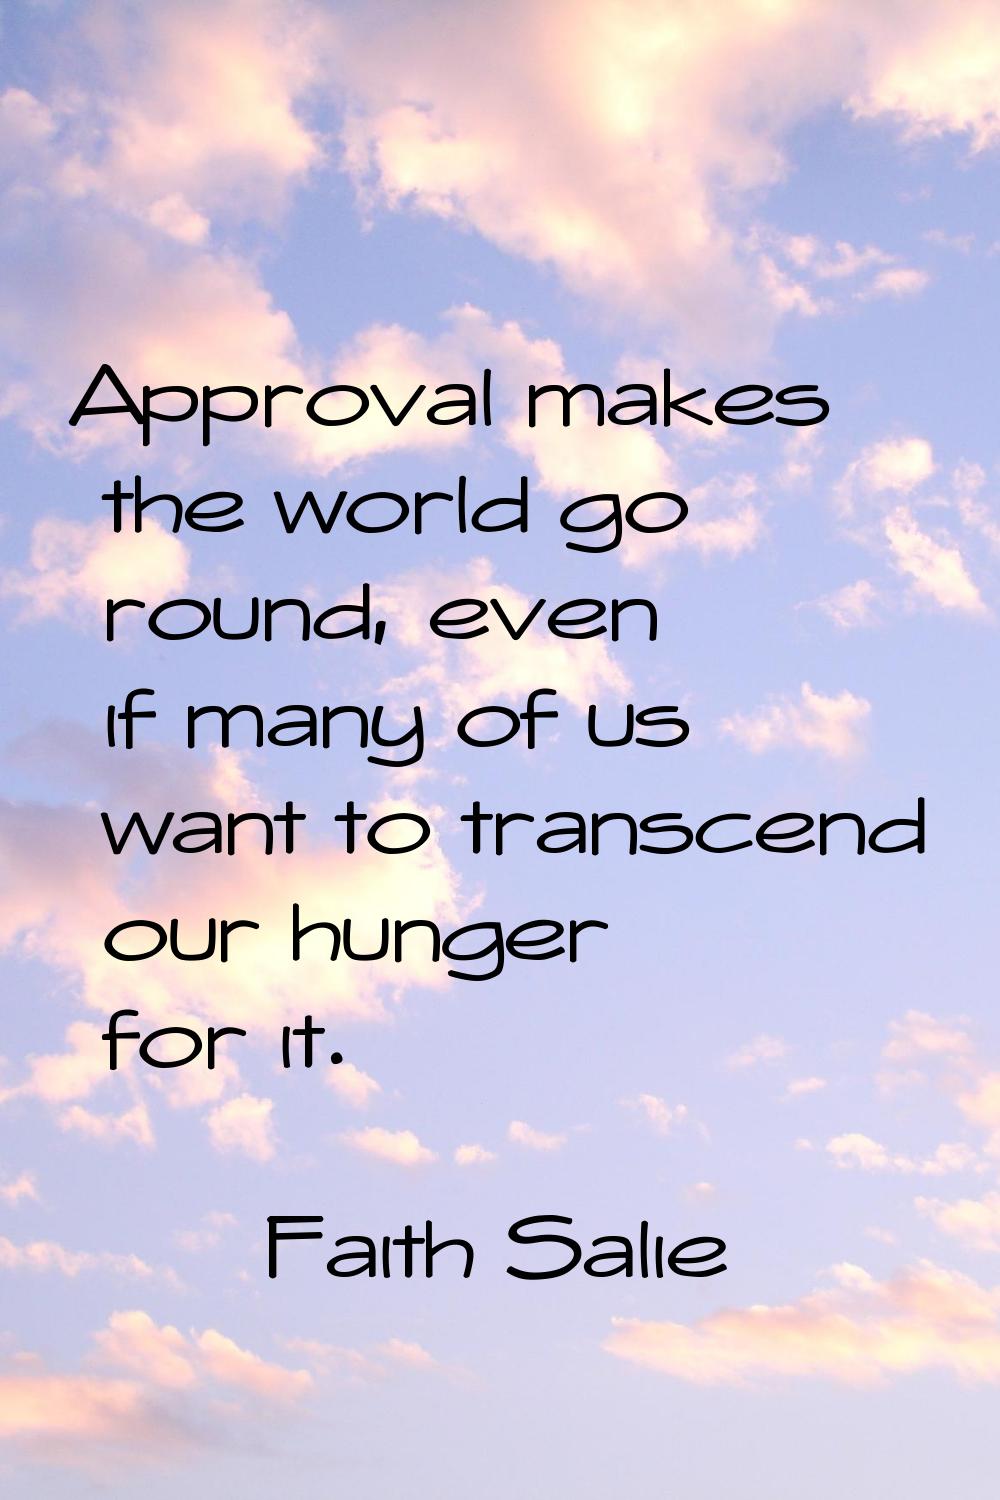 Approval makes the world go round, even if many of us want to transcend our hunger for it.